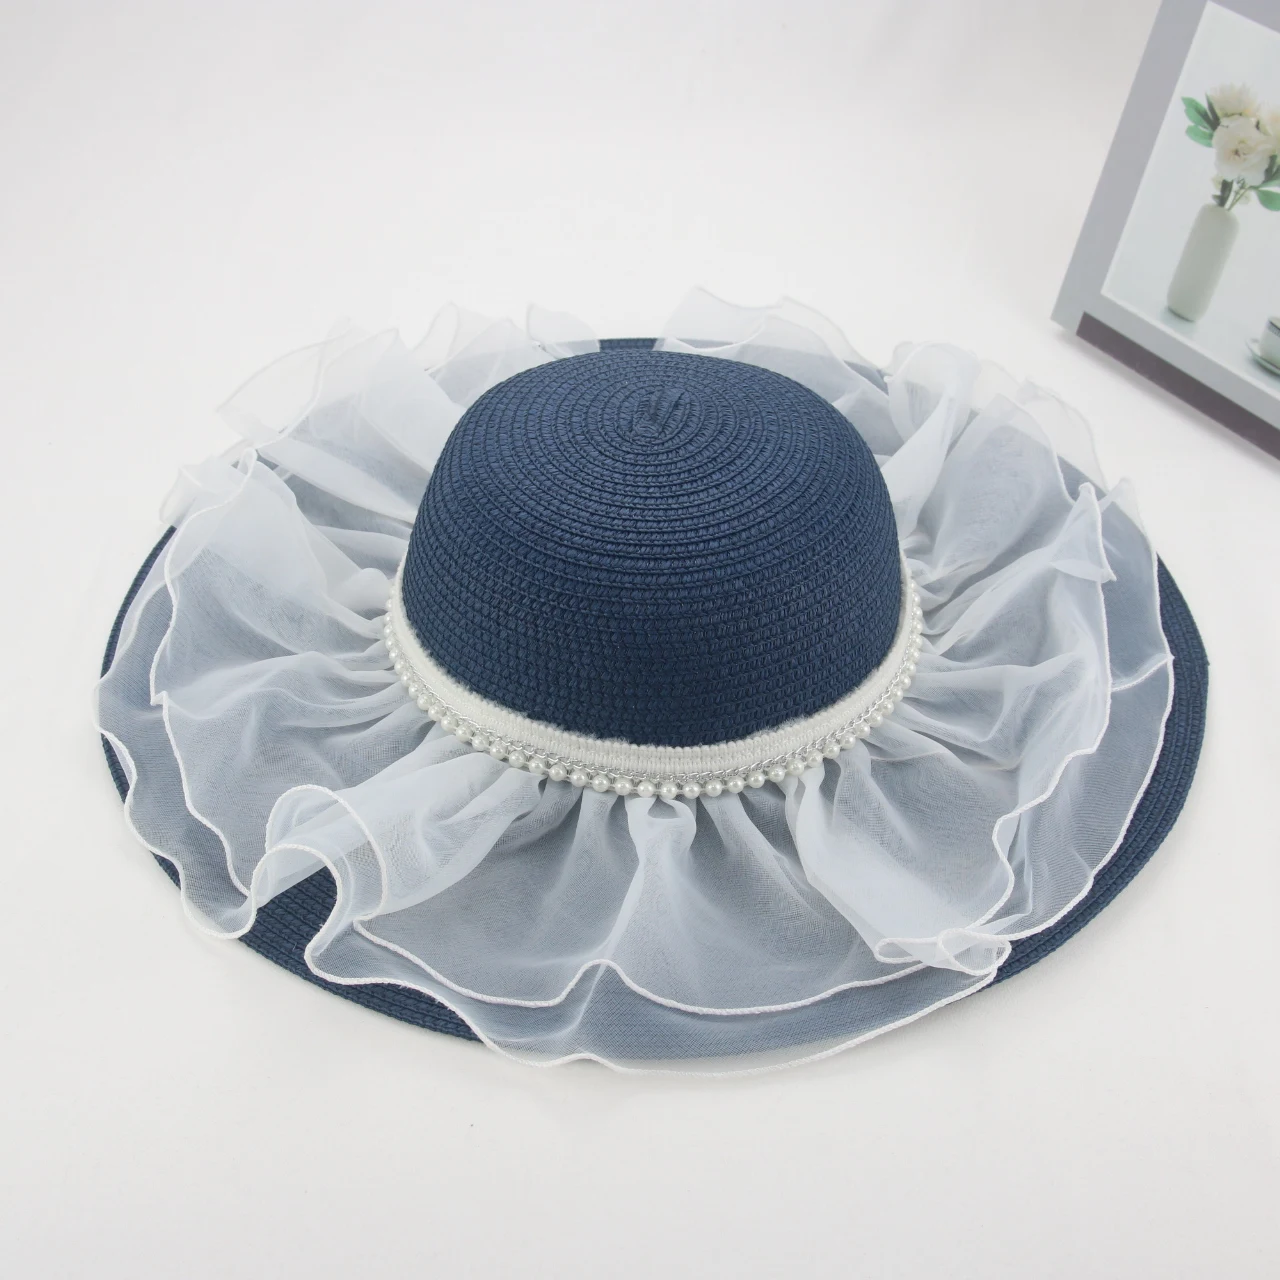 

Hat Bucket Hat Beach Big Brim 11cm Solid Yarn Mesh Outdoor Sun Protection Flat Dome White Black Hats for Women Casquette Femme